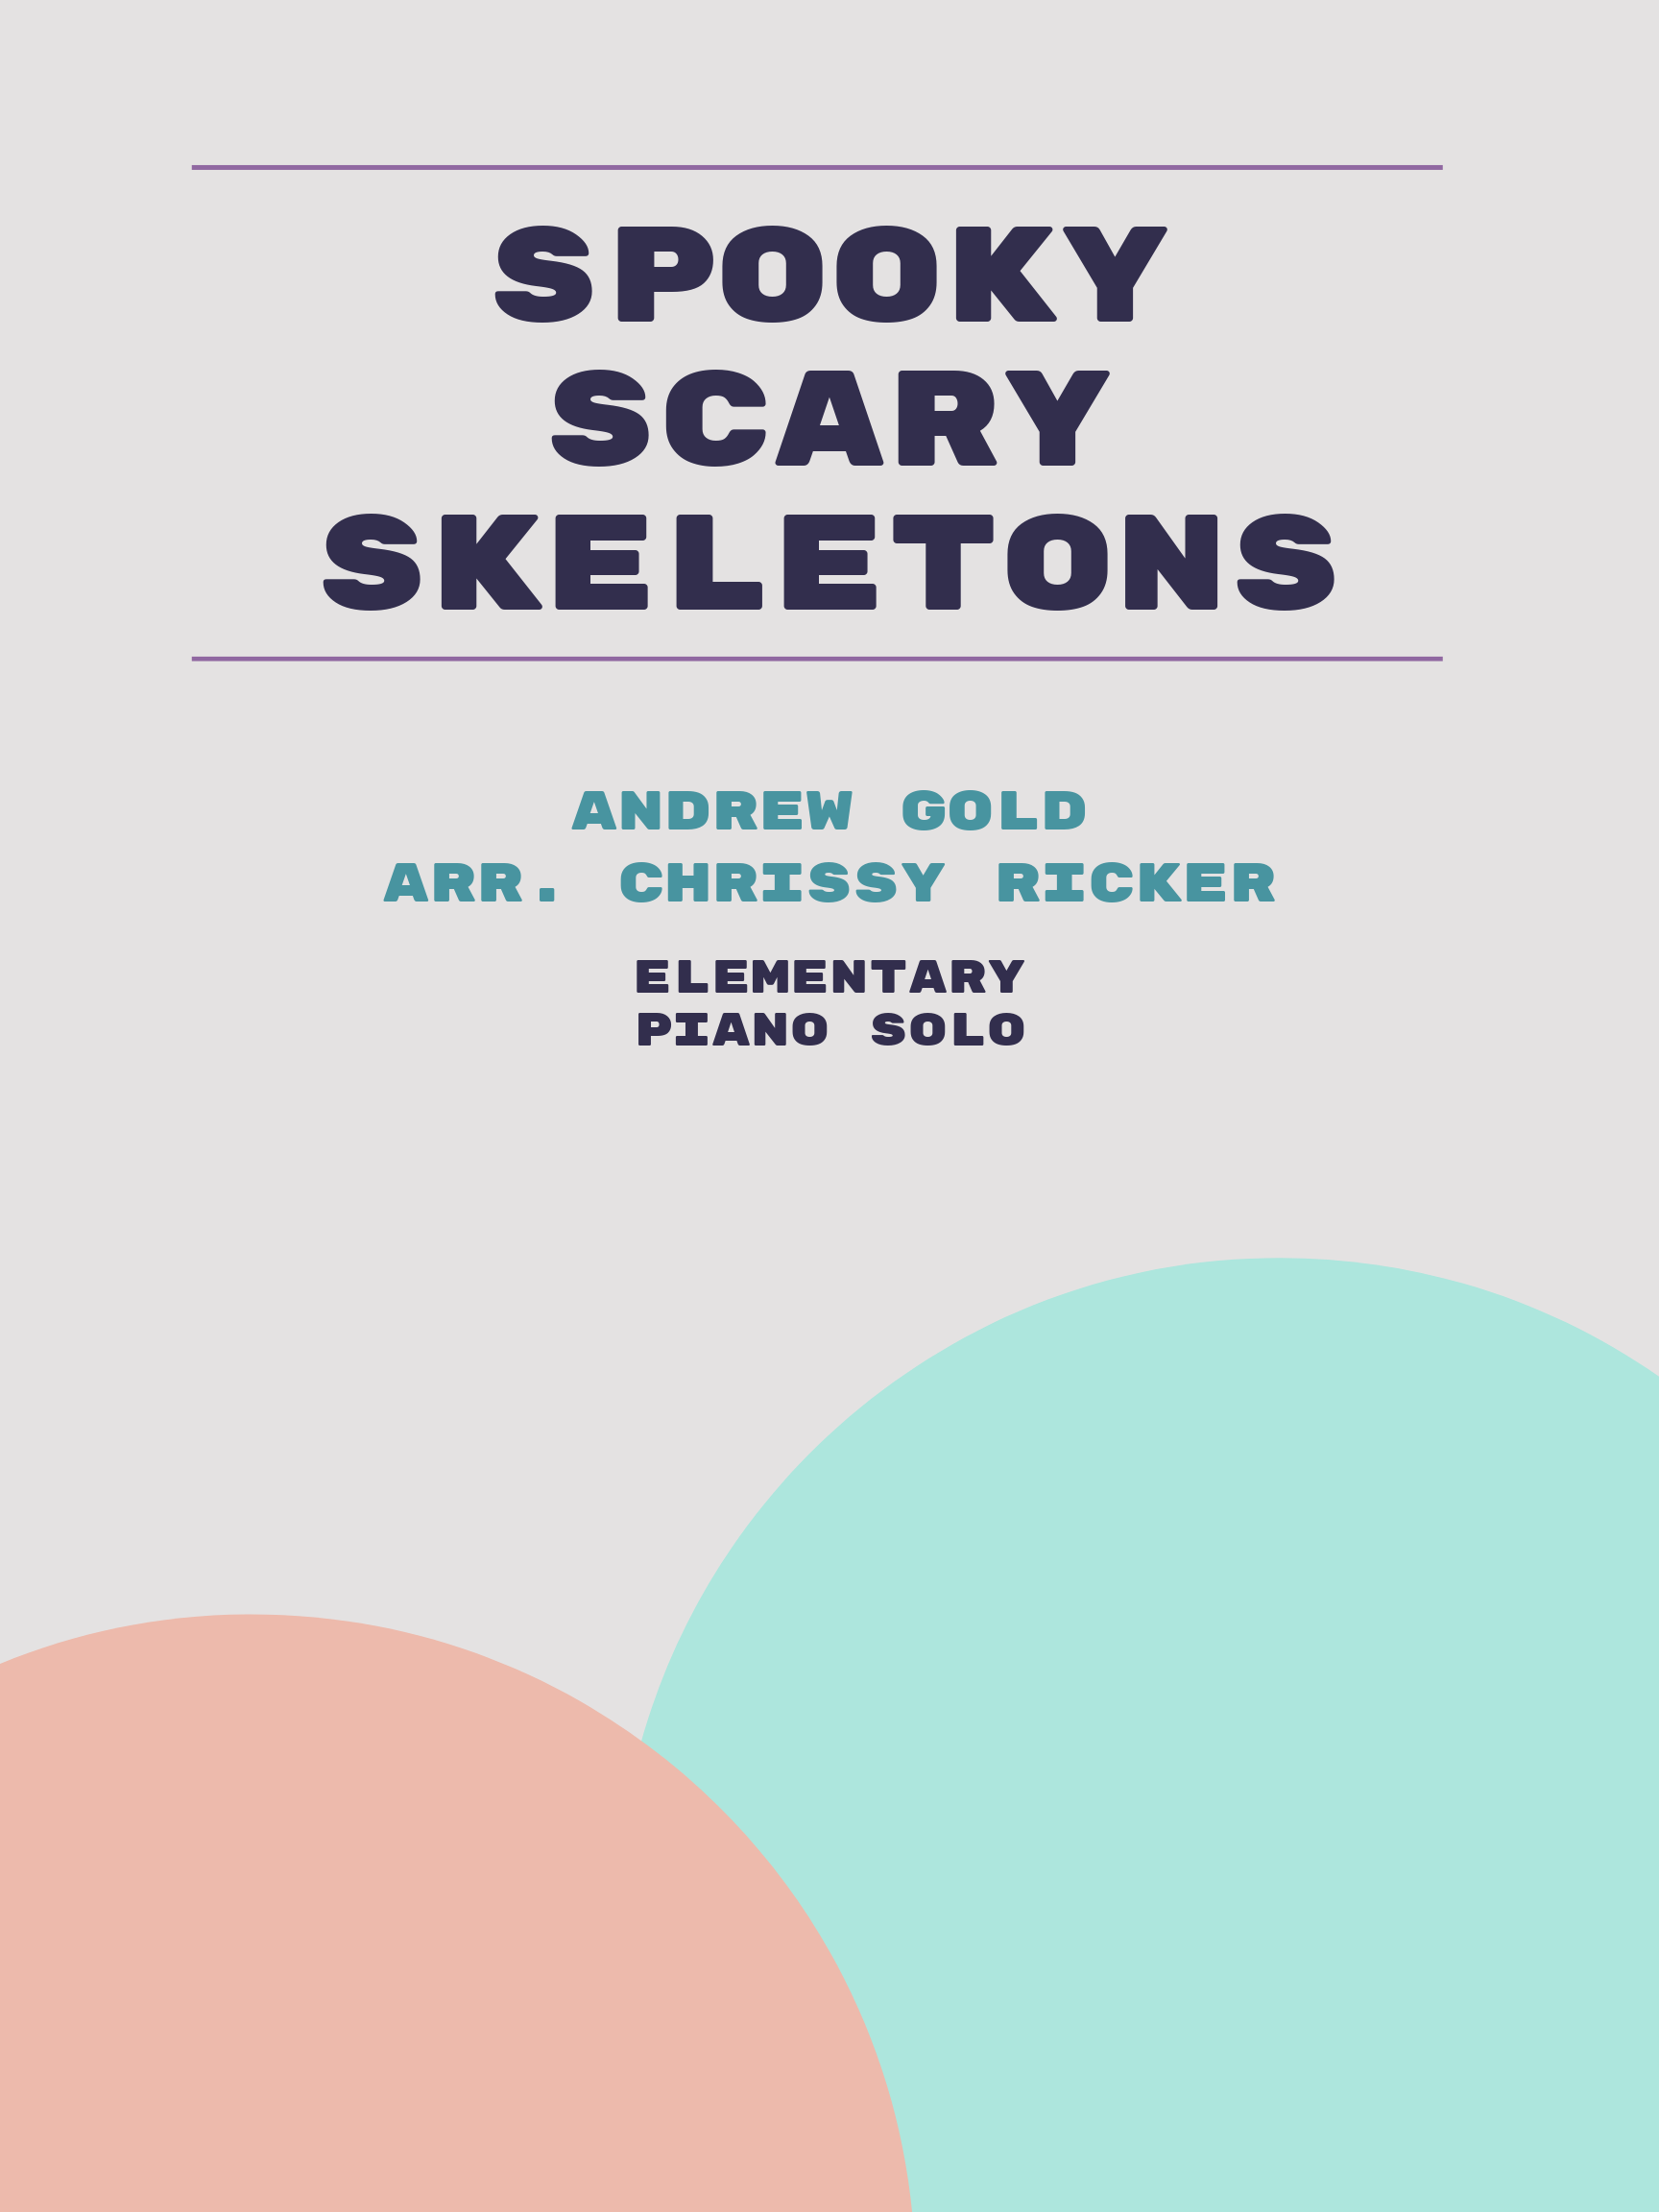 Spooky Scary Skeletons by Andrew Gold